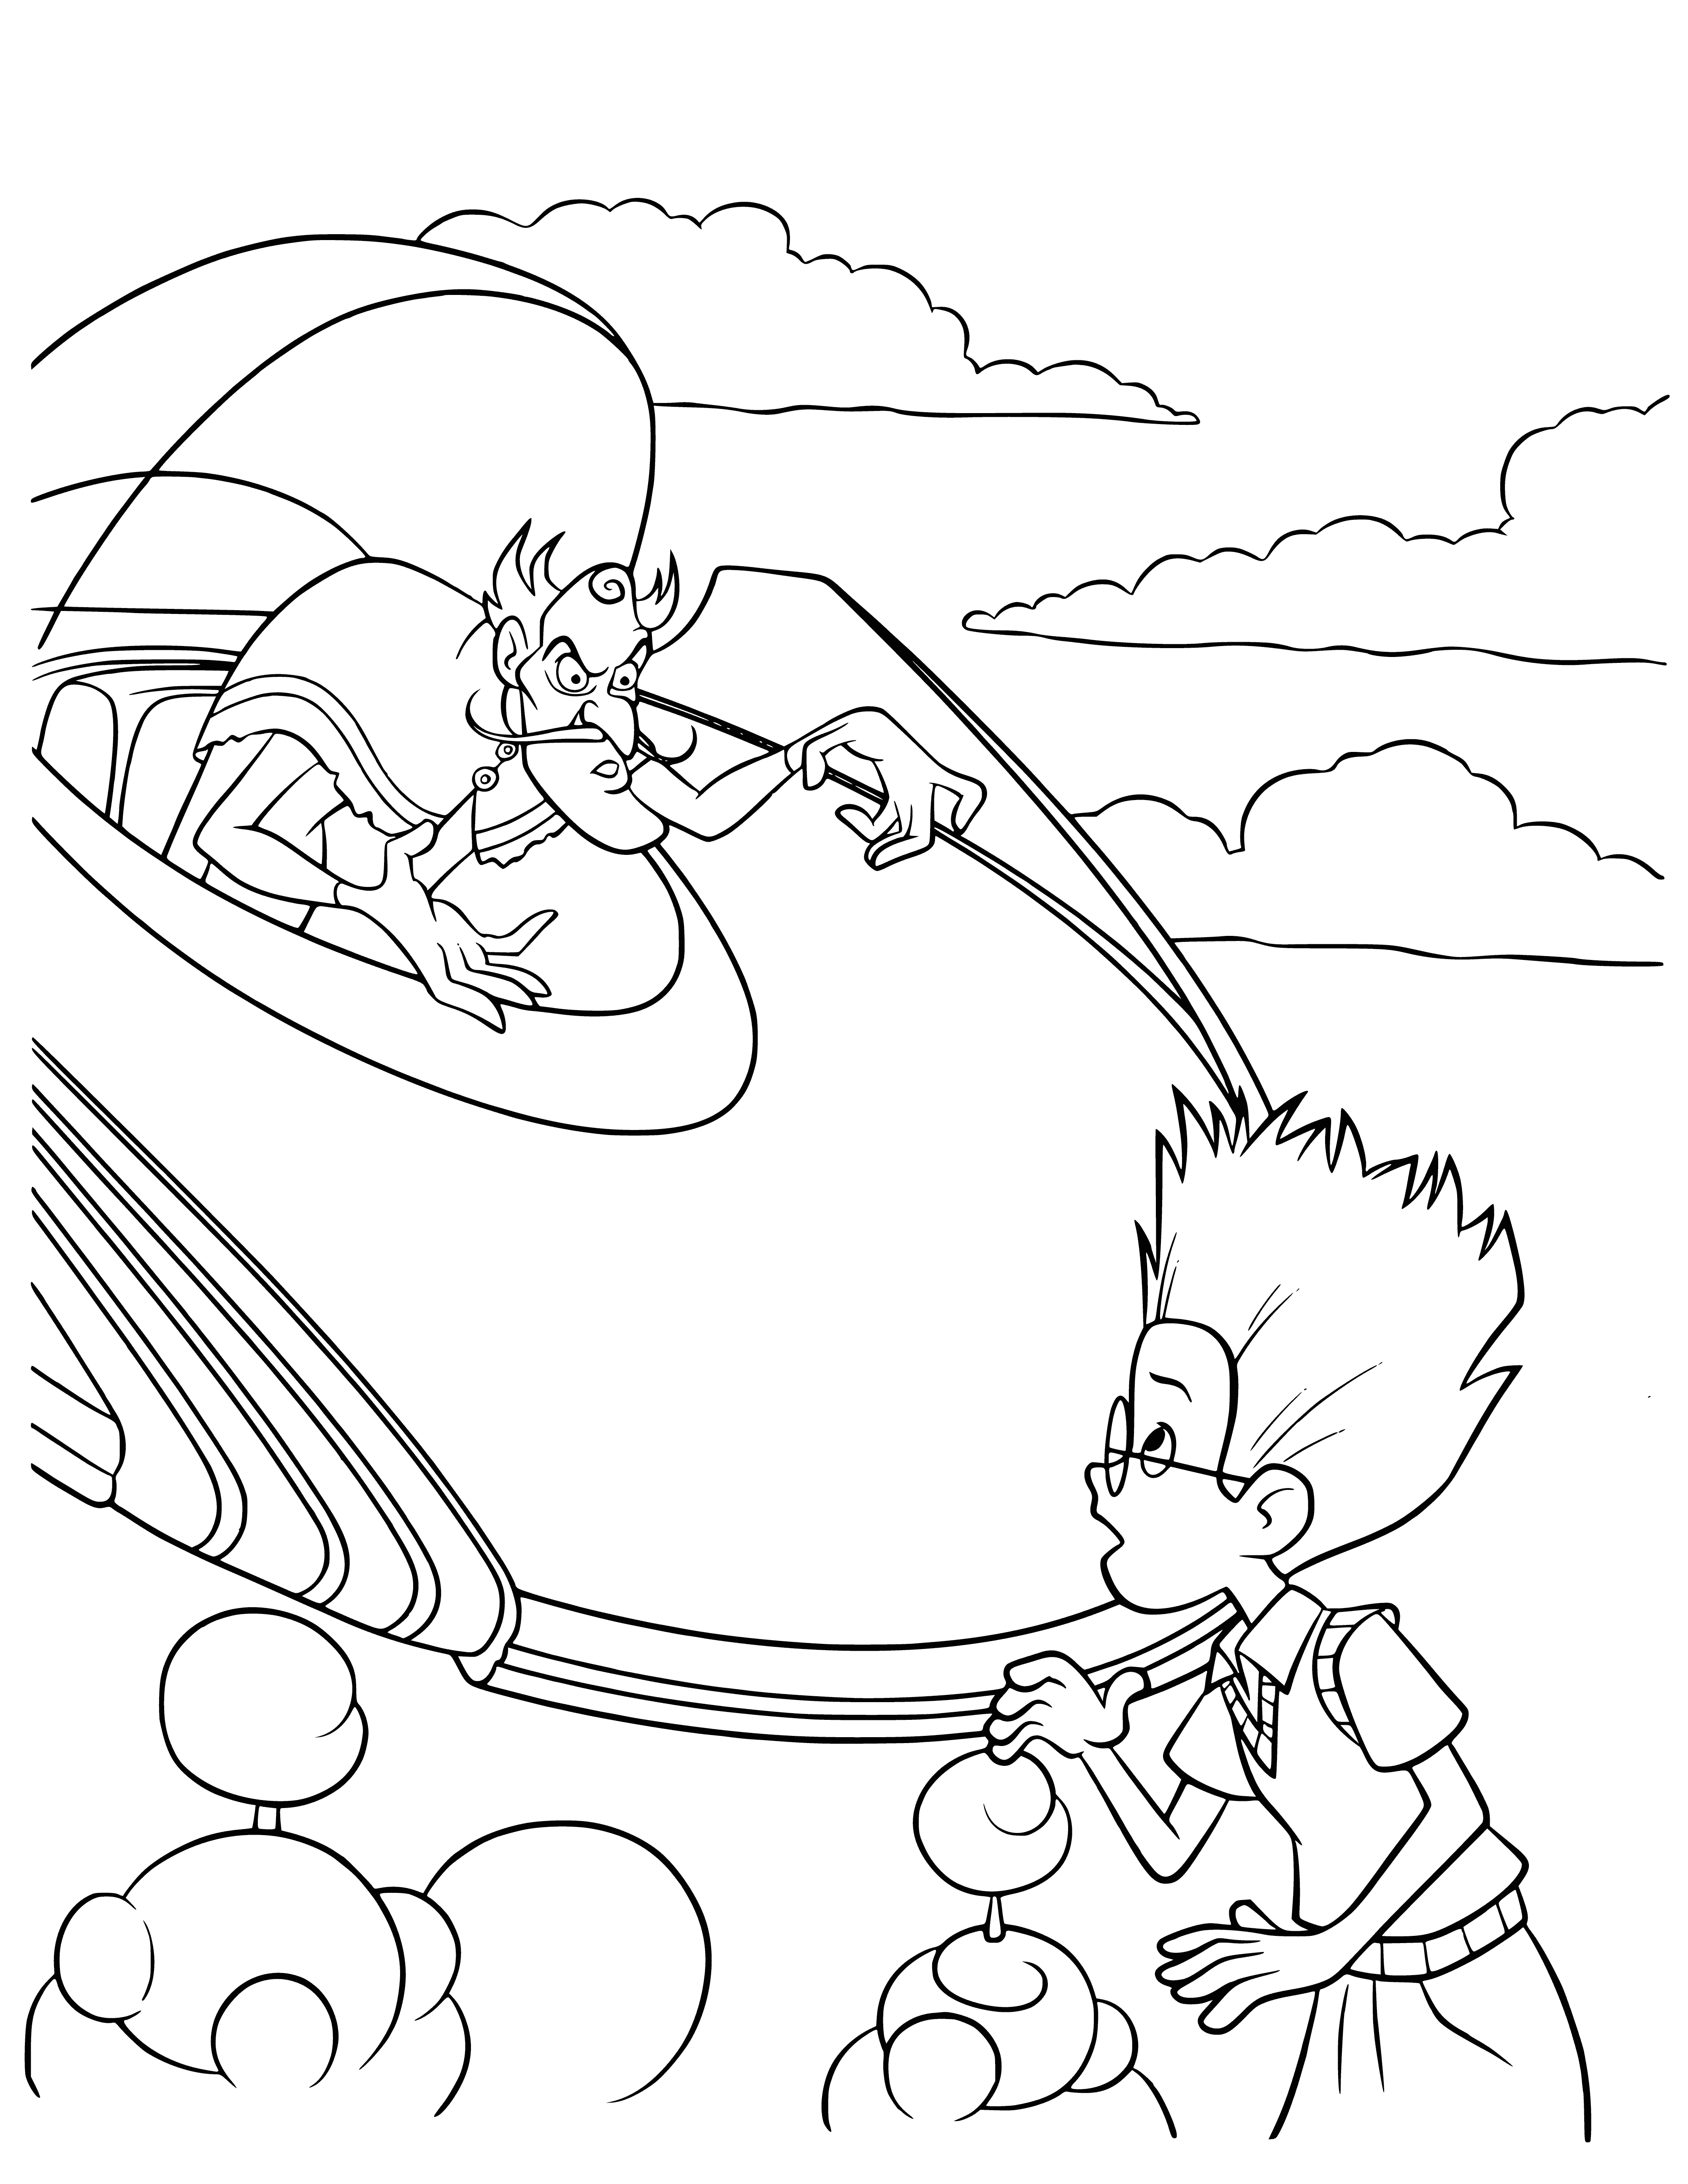 coloring page: Flying saucer hovers above a green field with trees and houses in the distance. Has a smooth, metallic surface, four round windows and a large, rectangular one in the center.